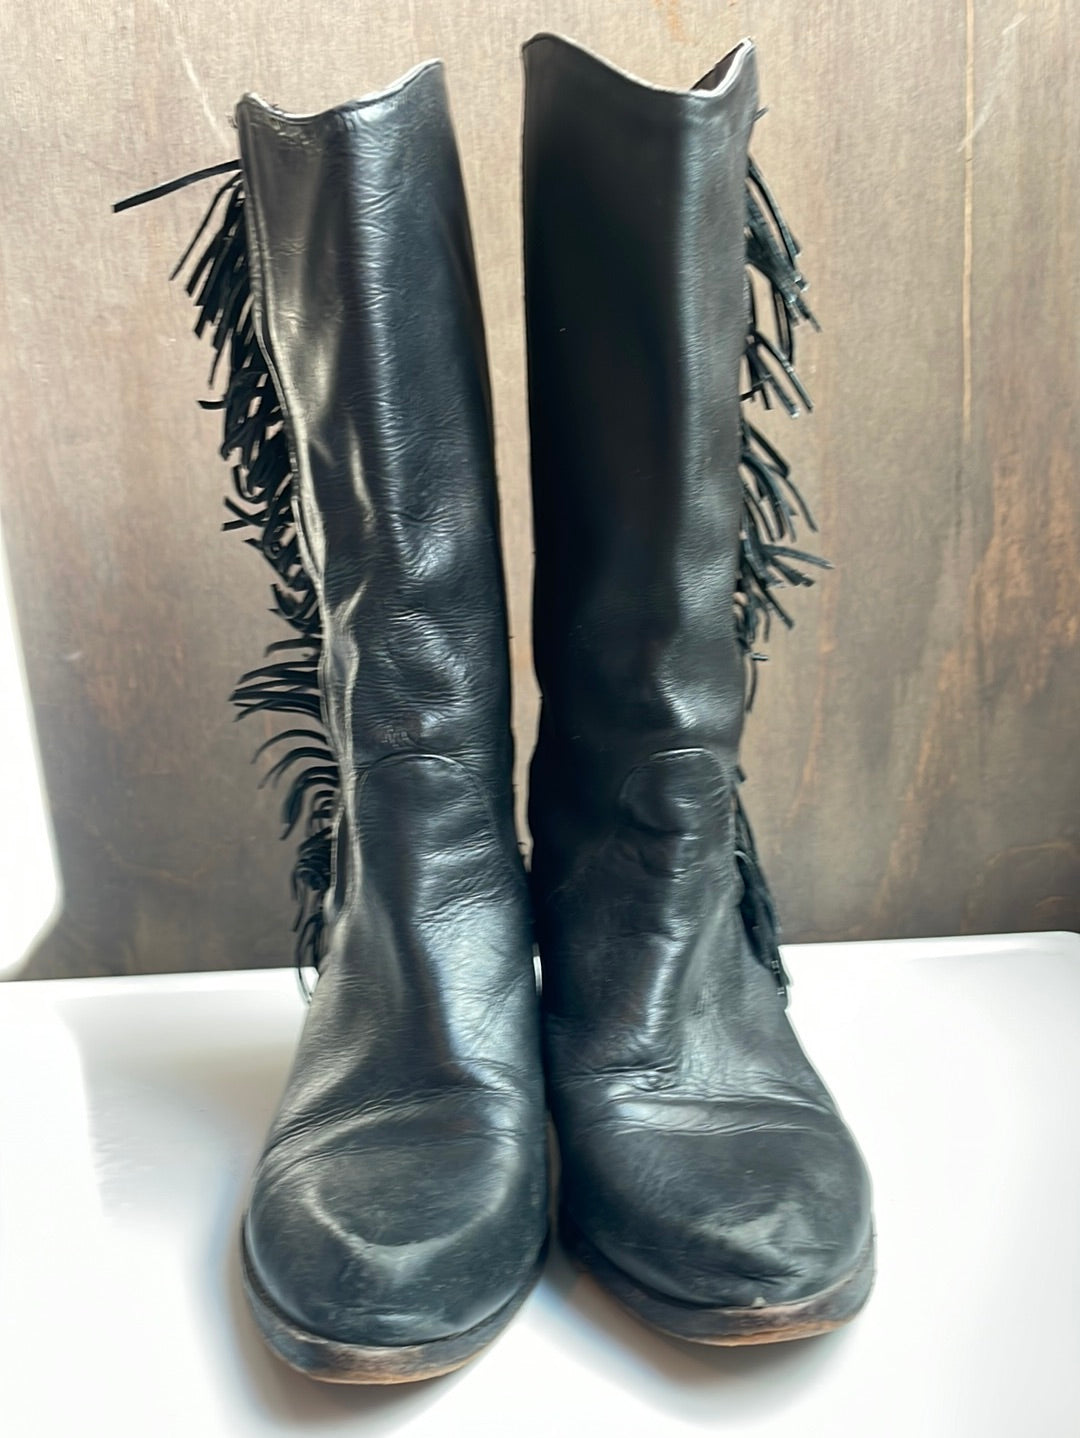 Black Leather Boots with Fringe